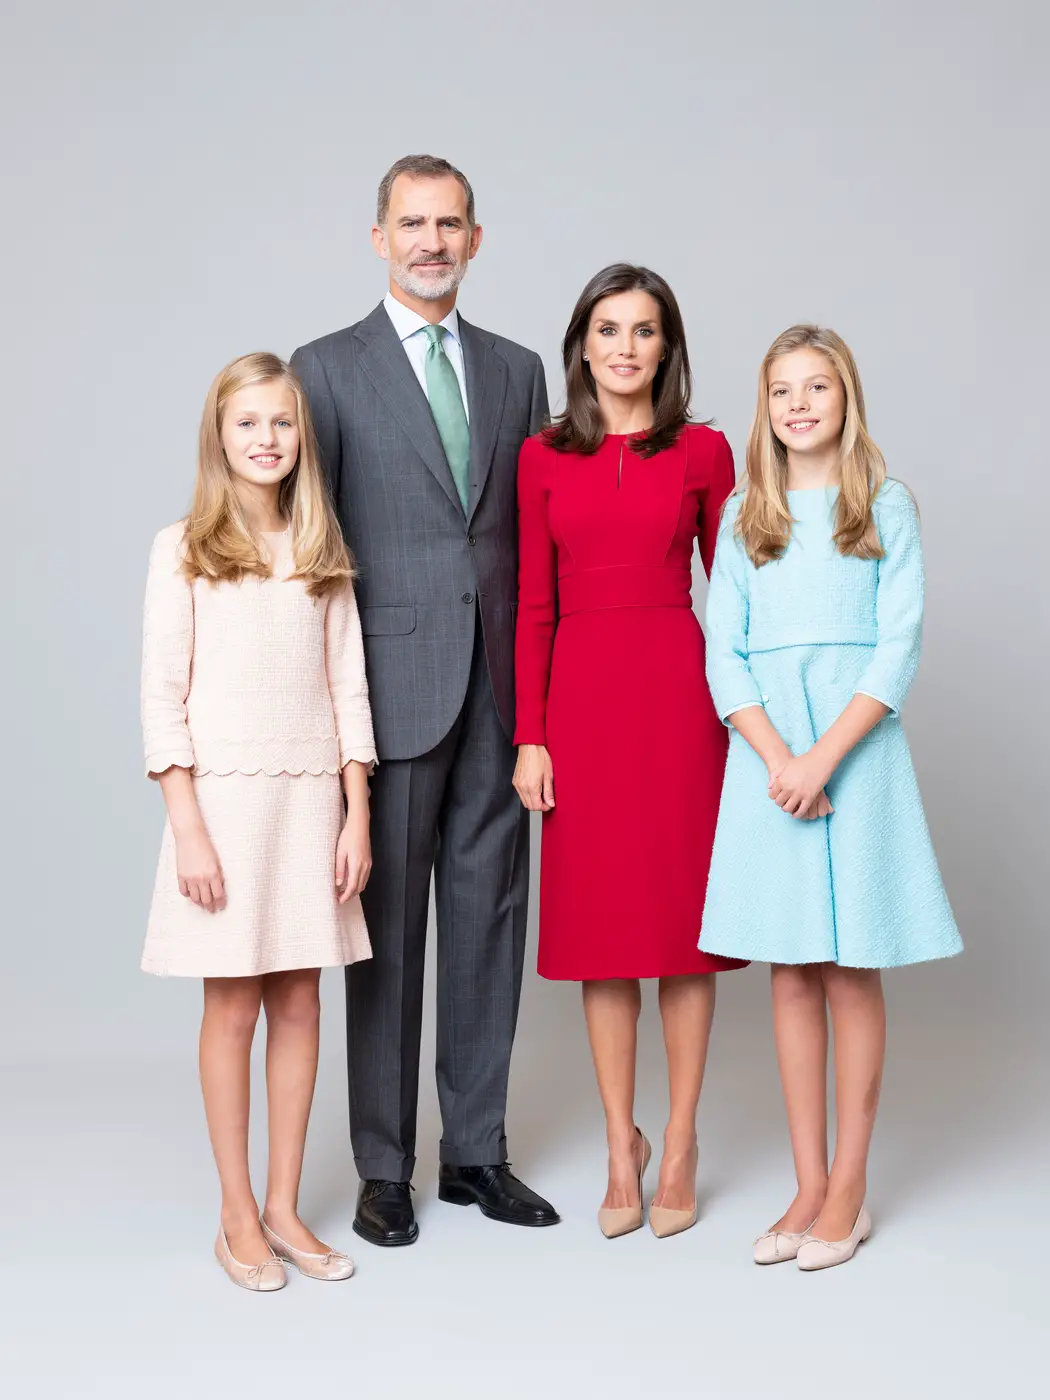 Spanish Royal Family released new official portraits